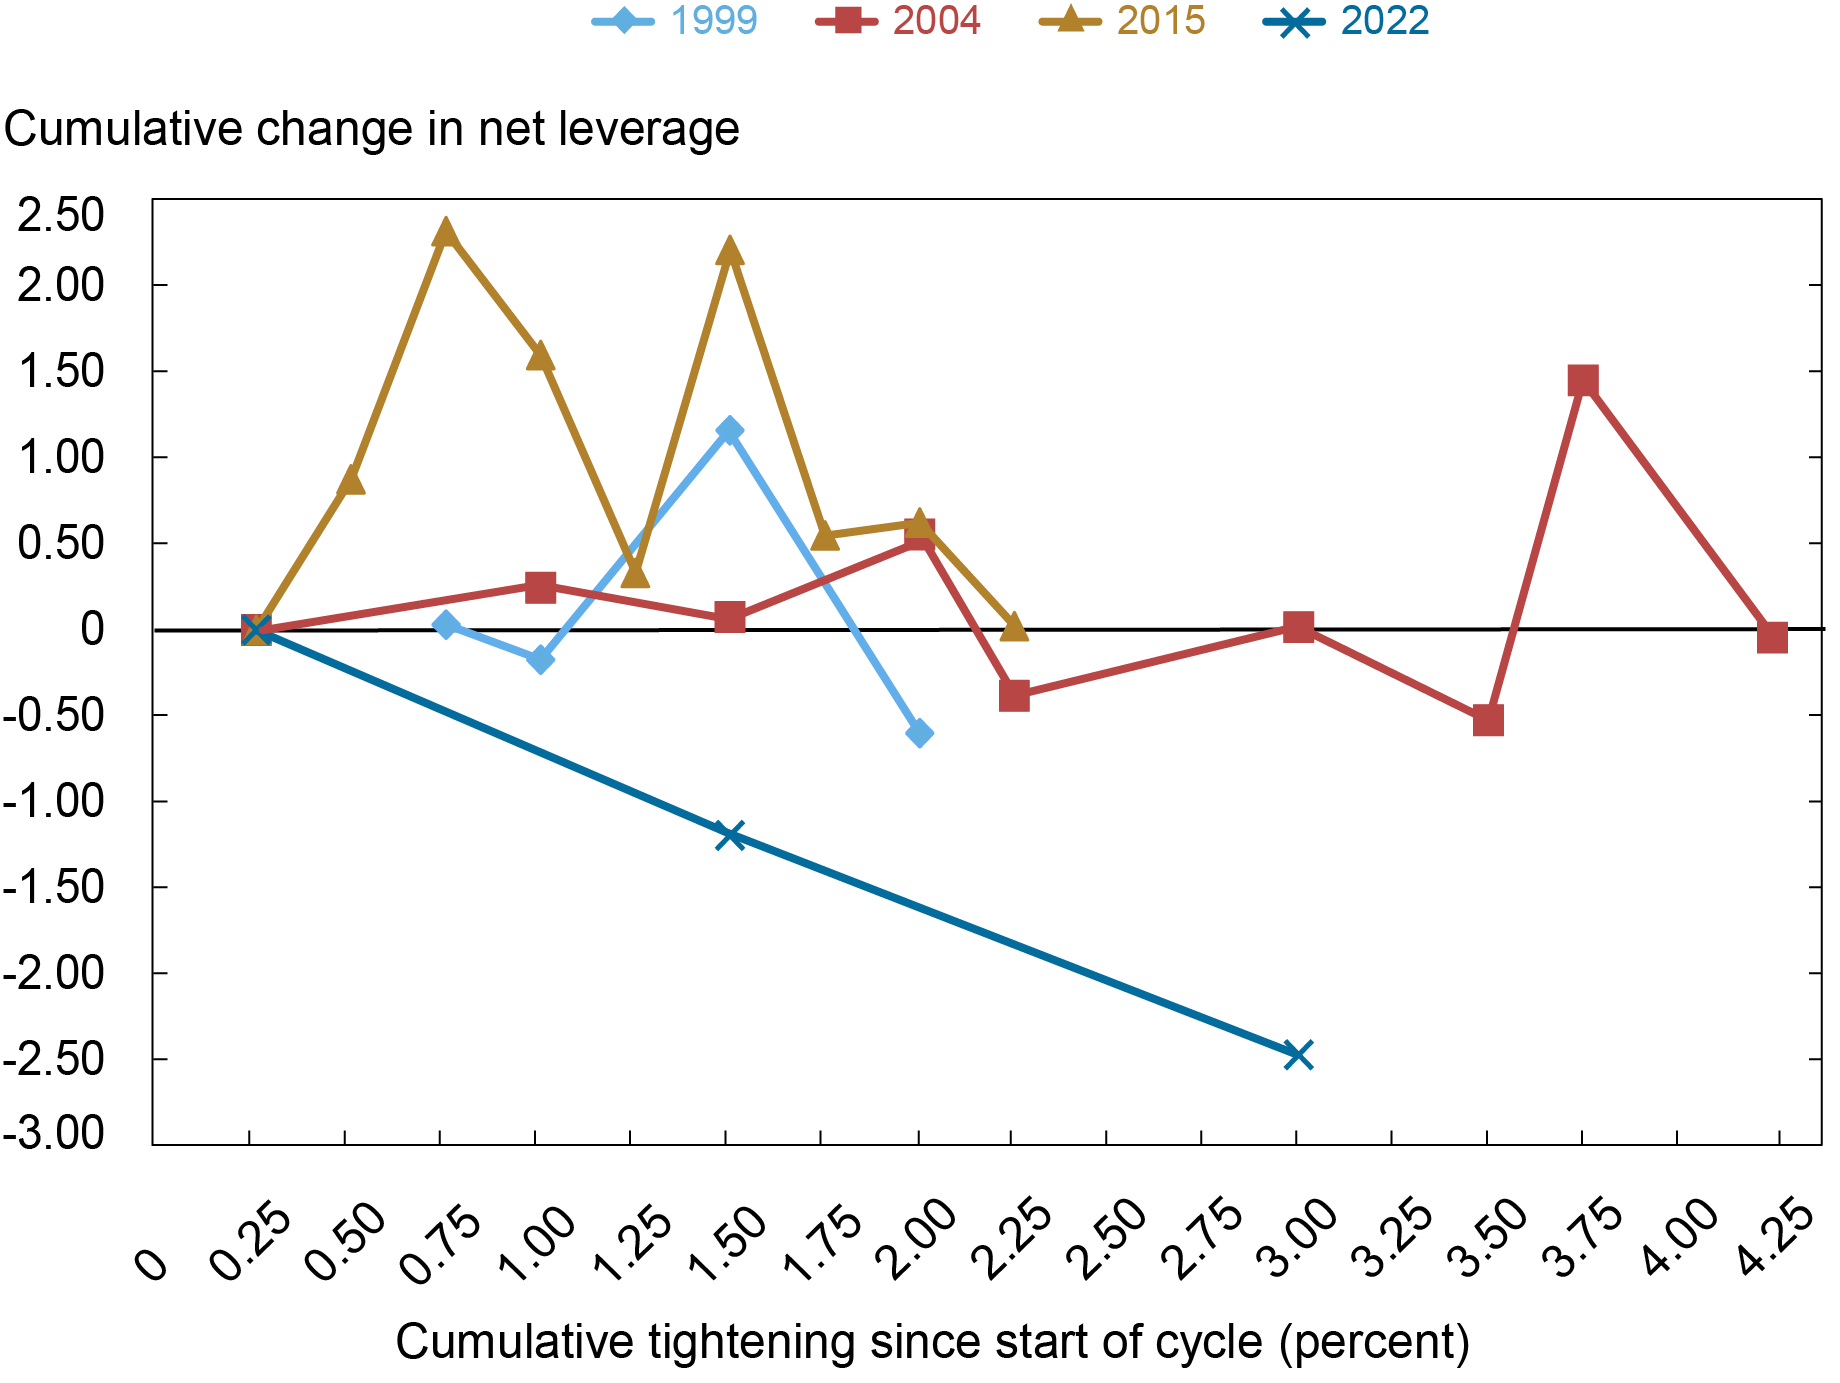 Liberty Street Economics chart showing the median net leverage of investment grade firms has been declining noticeably in 2022, unlike the previous three tightening cycles. In contrast, in those cycles, net leverage remained flat or increased.